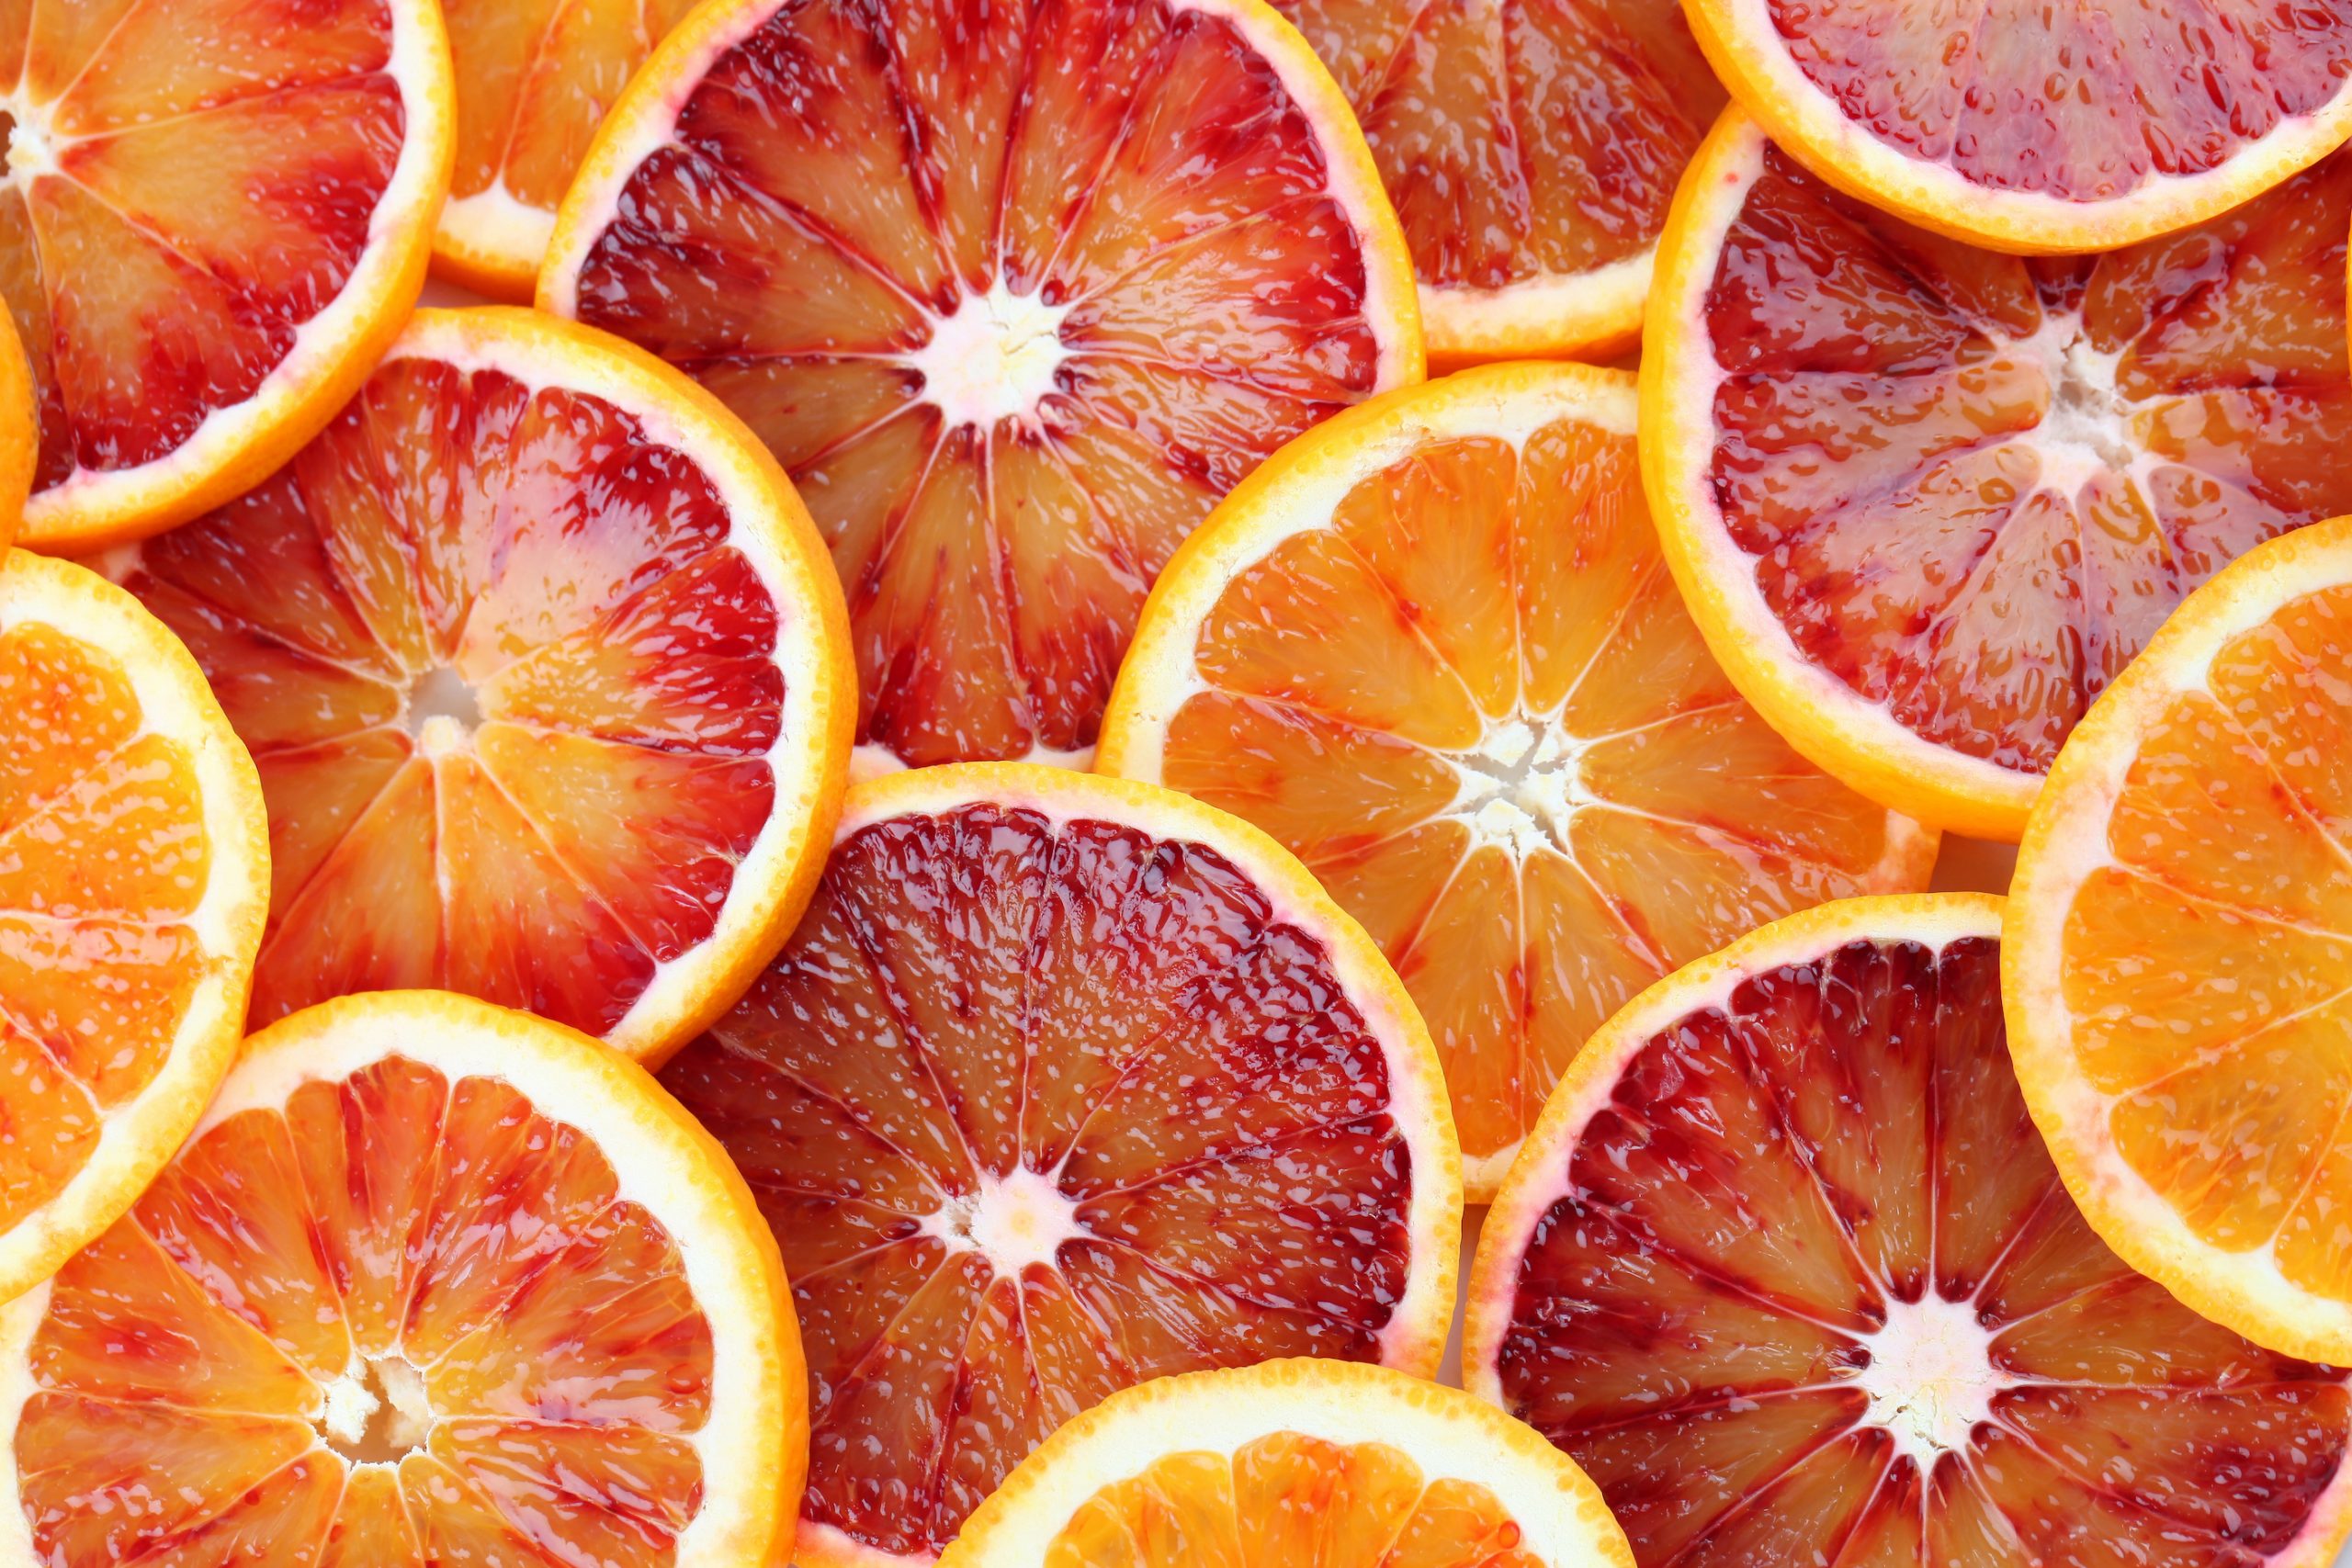 Slices of blood oranges in different shades